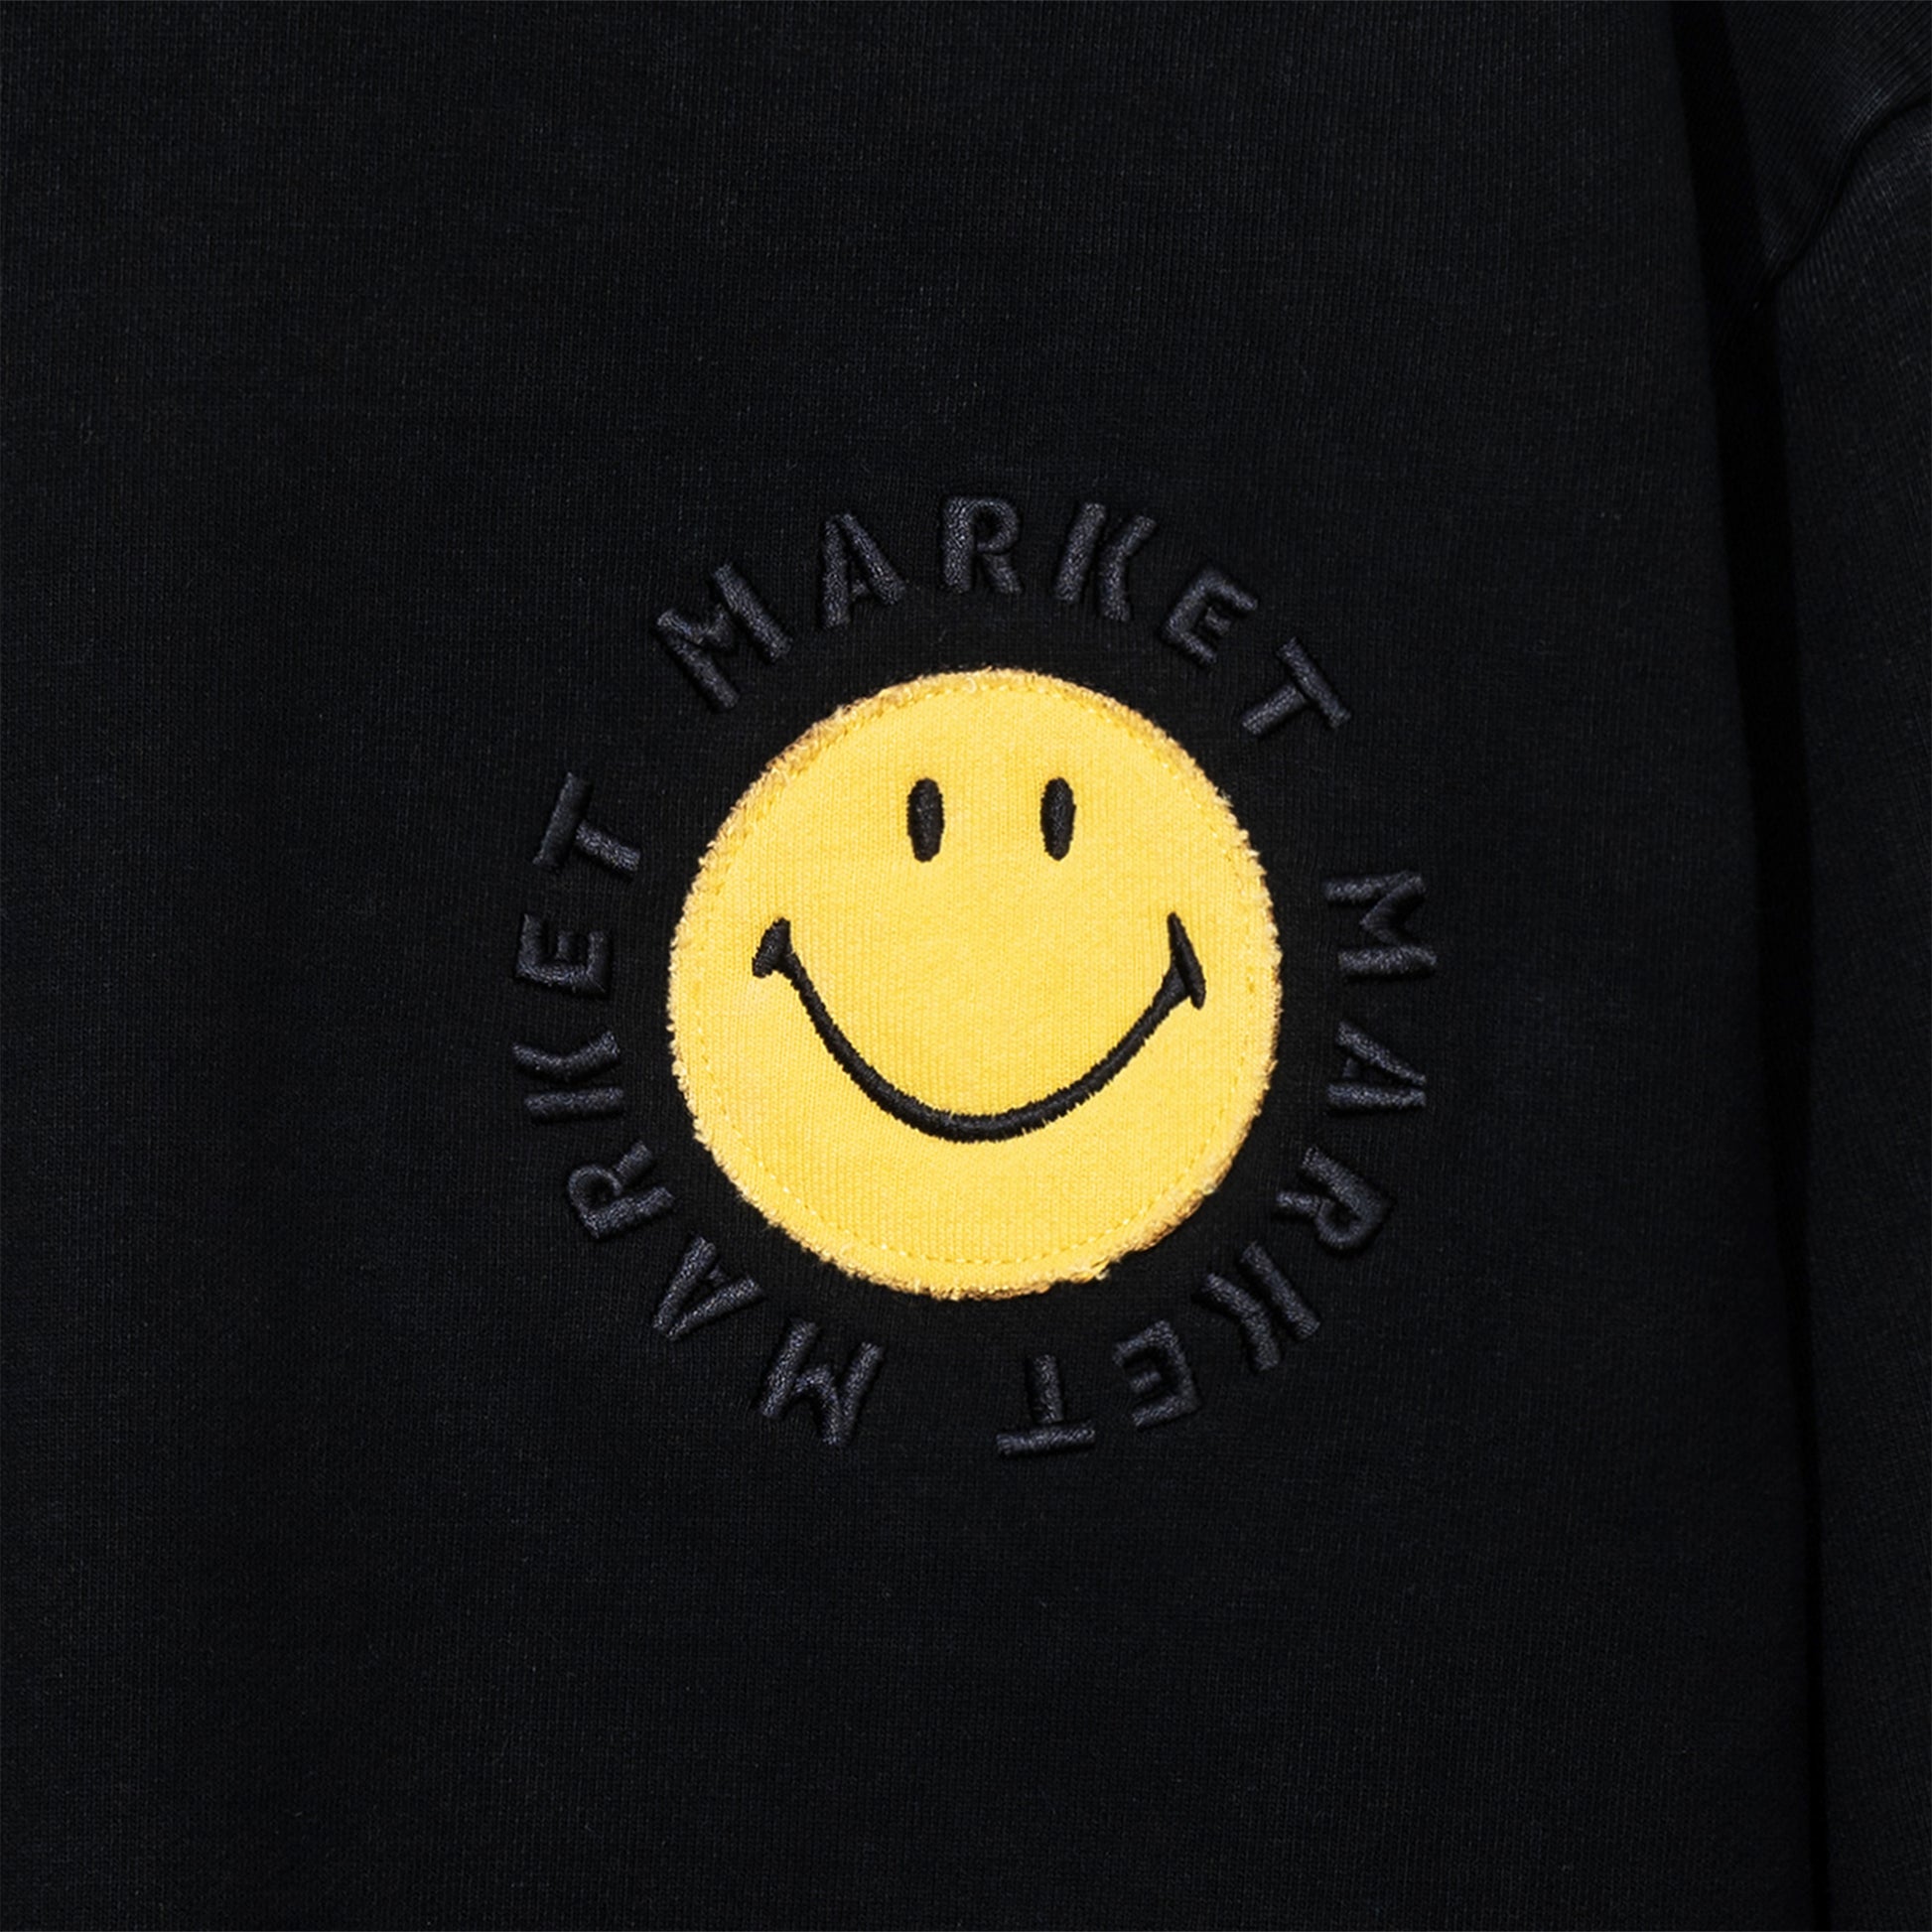 MARKET clothing brand SMILEY VINTAGE WASH CREWNECK. Find more graphic tees and hoodies at MarketStudios.com. Formally Chinatown Market.